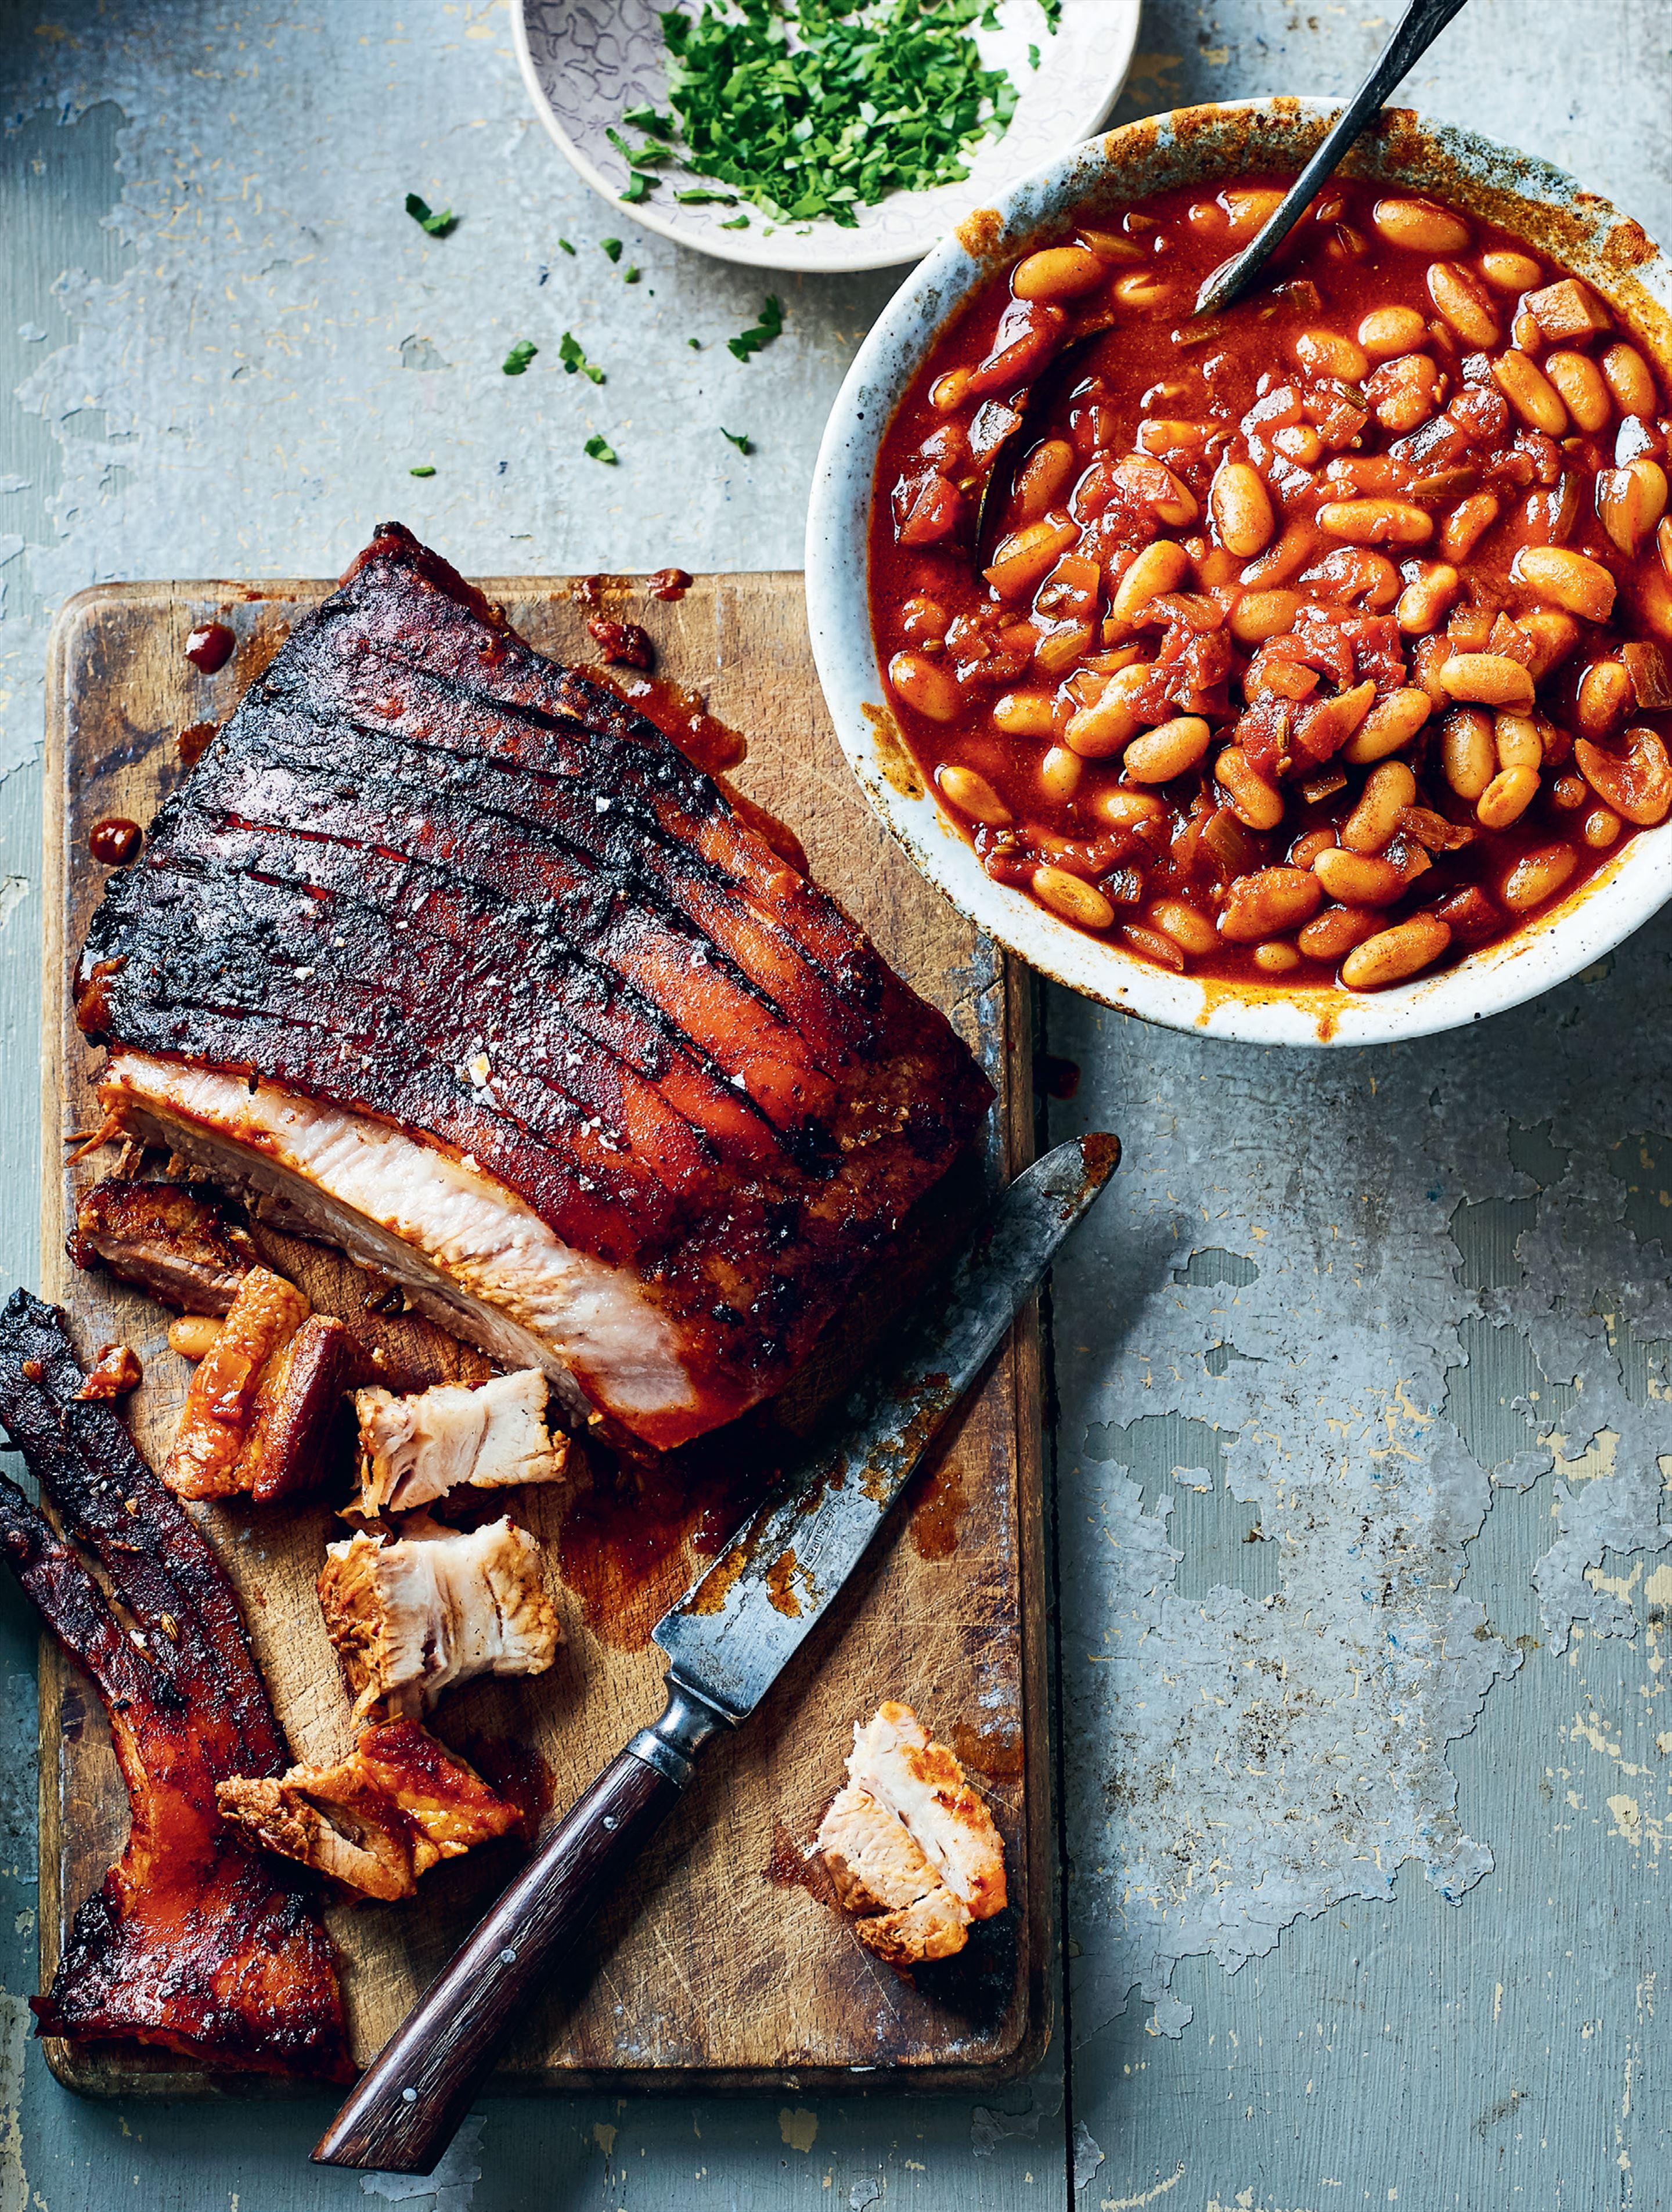 Pork belly with smoky beans